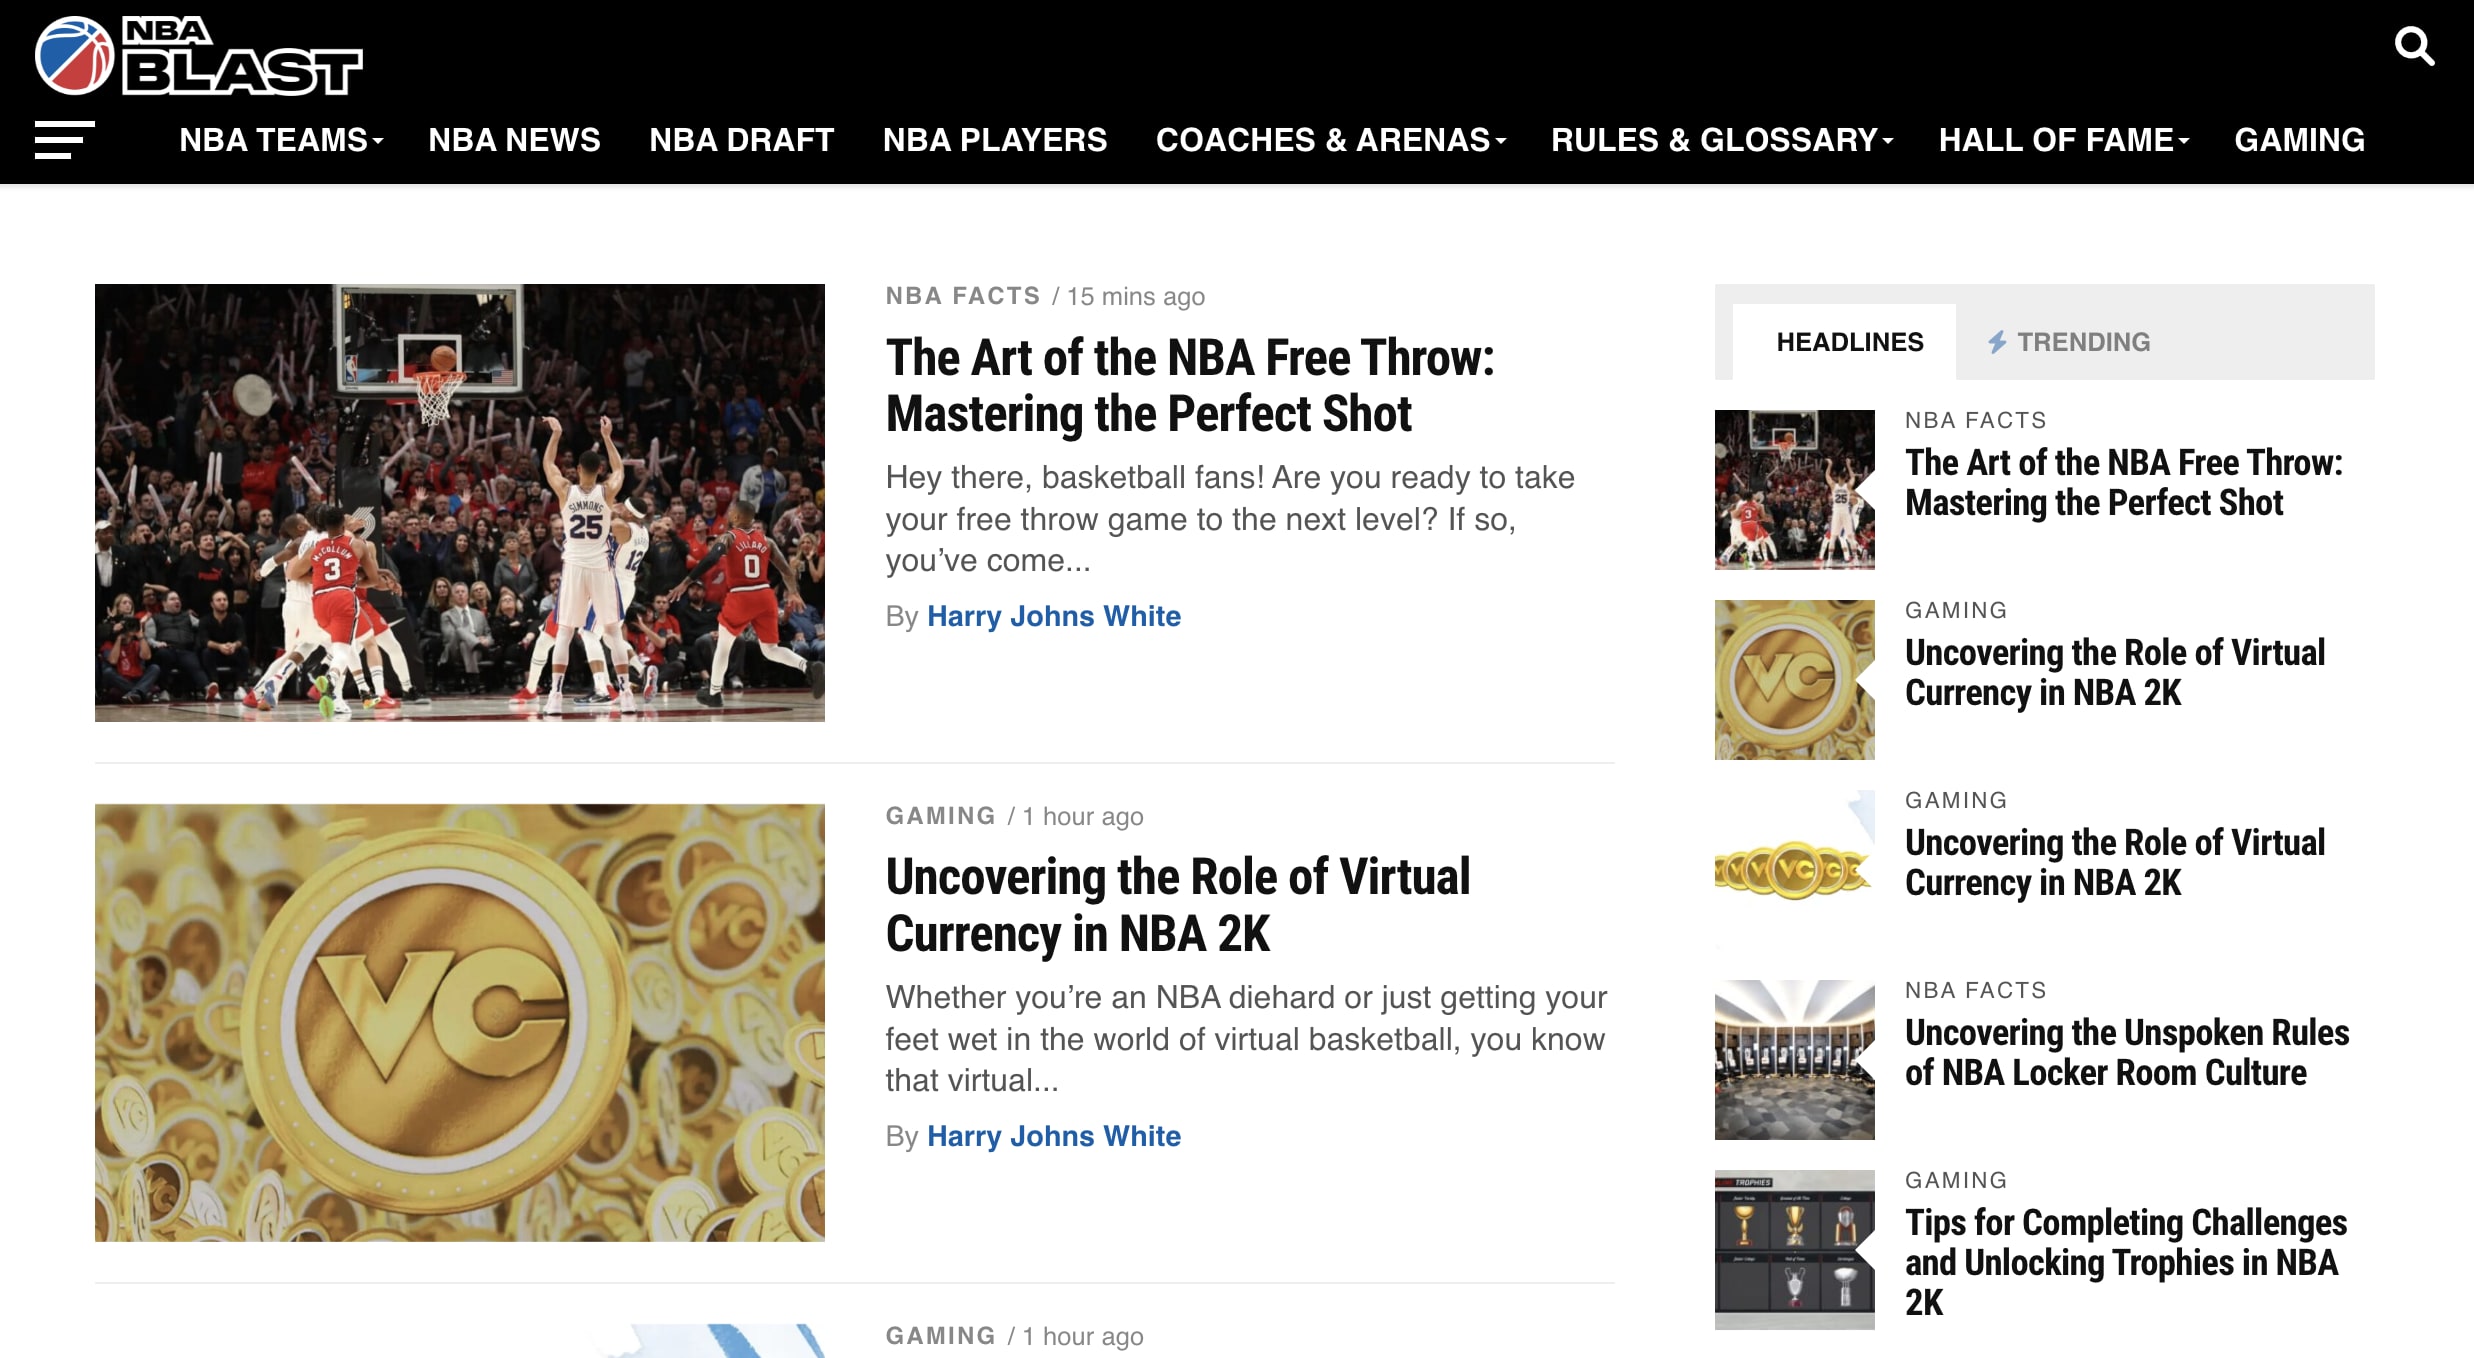 NBA Blast seeks to create a community around the NBA, as evident by its homepage. 